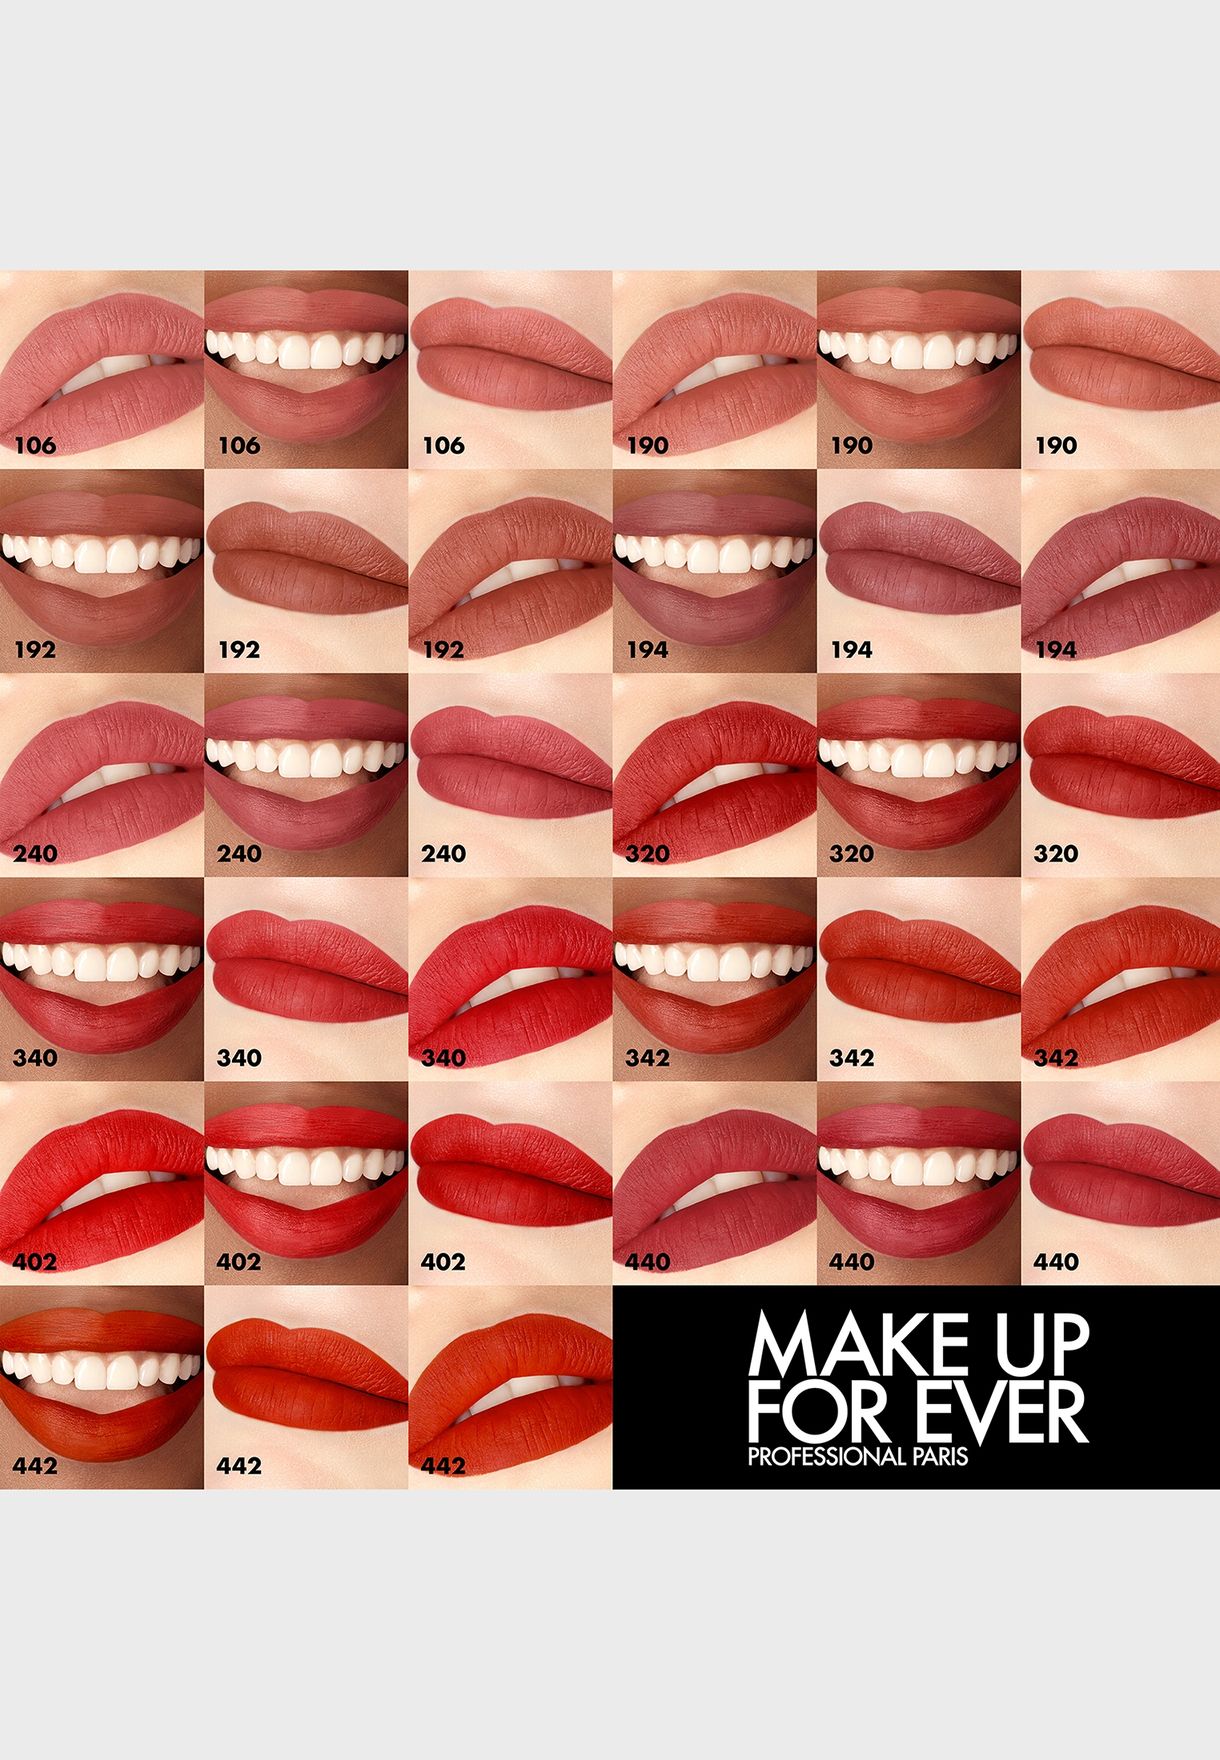 Rouge Artist For Ever Matte Lipstick - 240 - Rose Now And Always